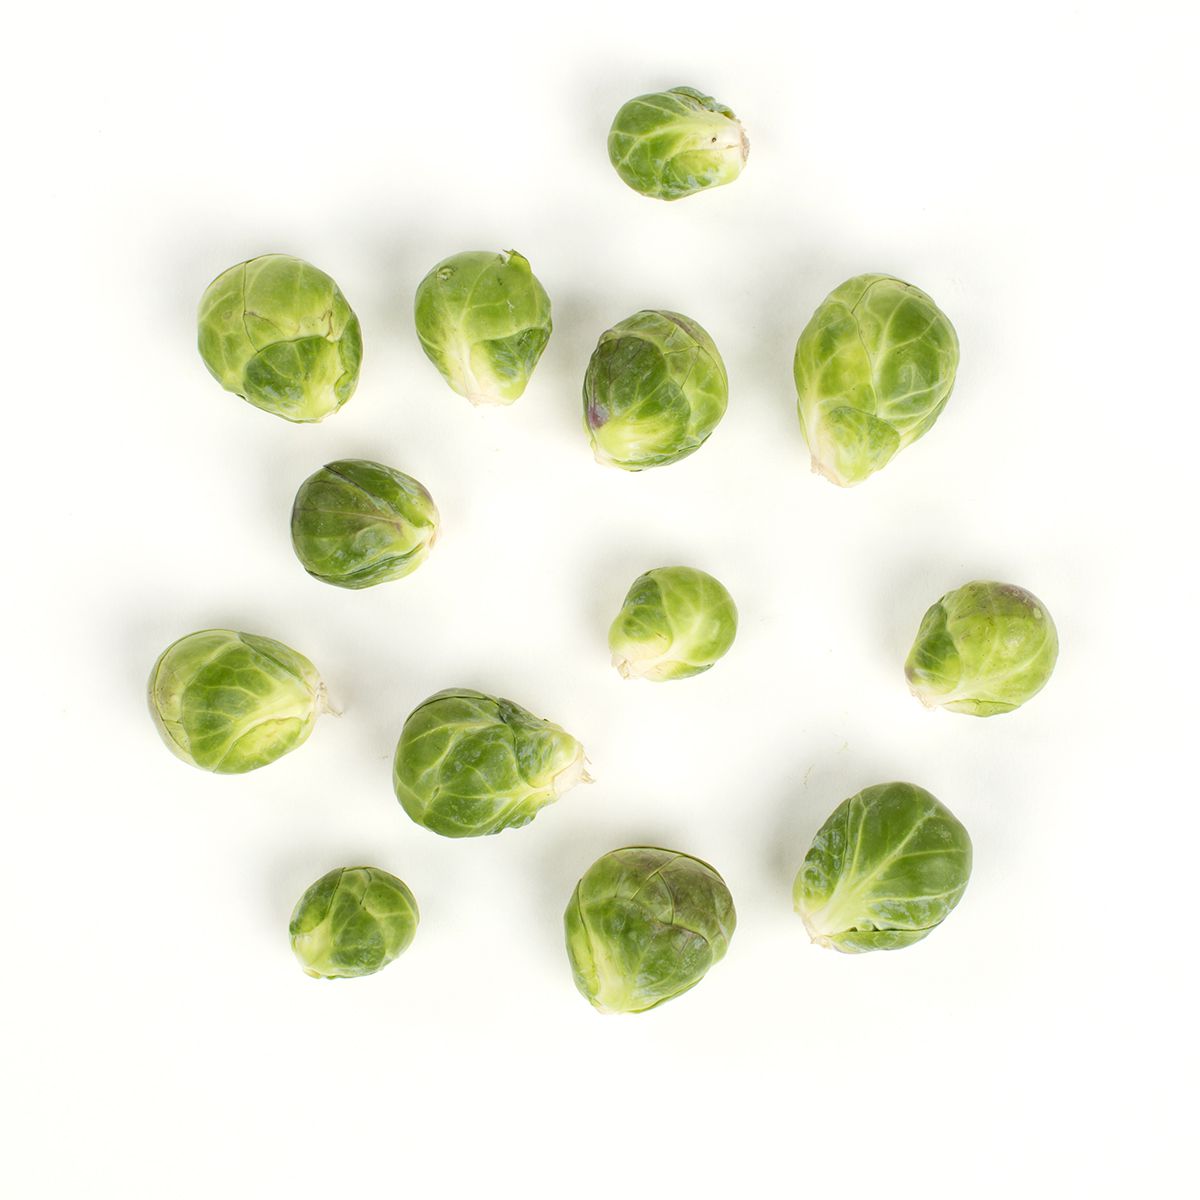 Hitchcock Farms Loose Jumbo Brussels Sprouts